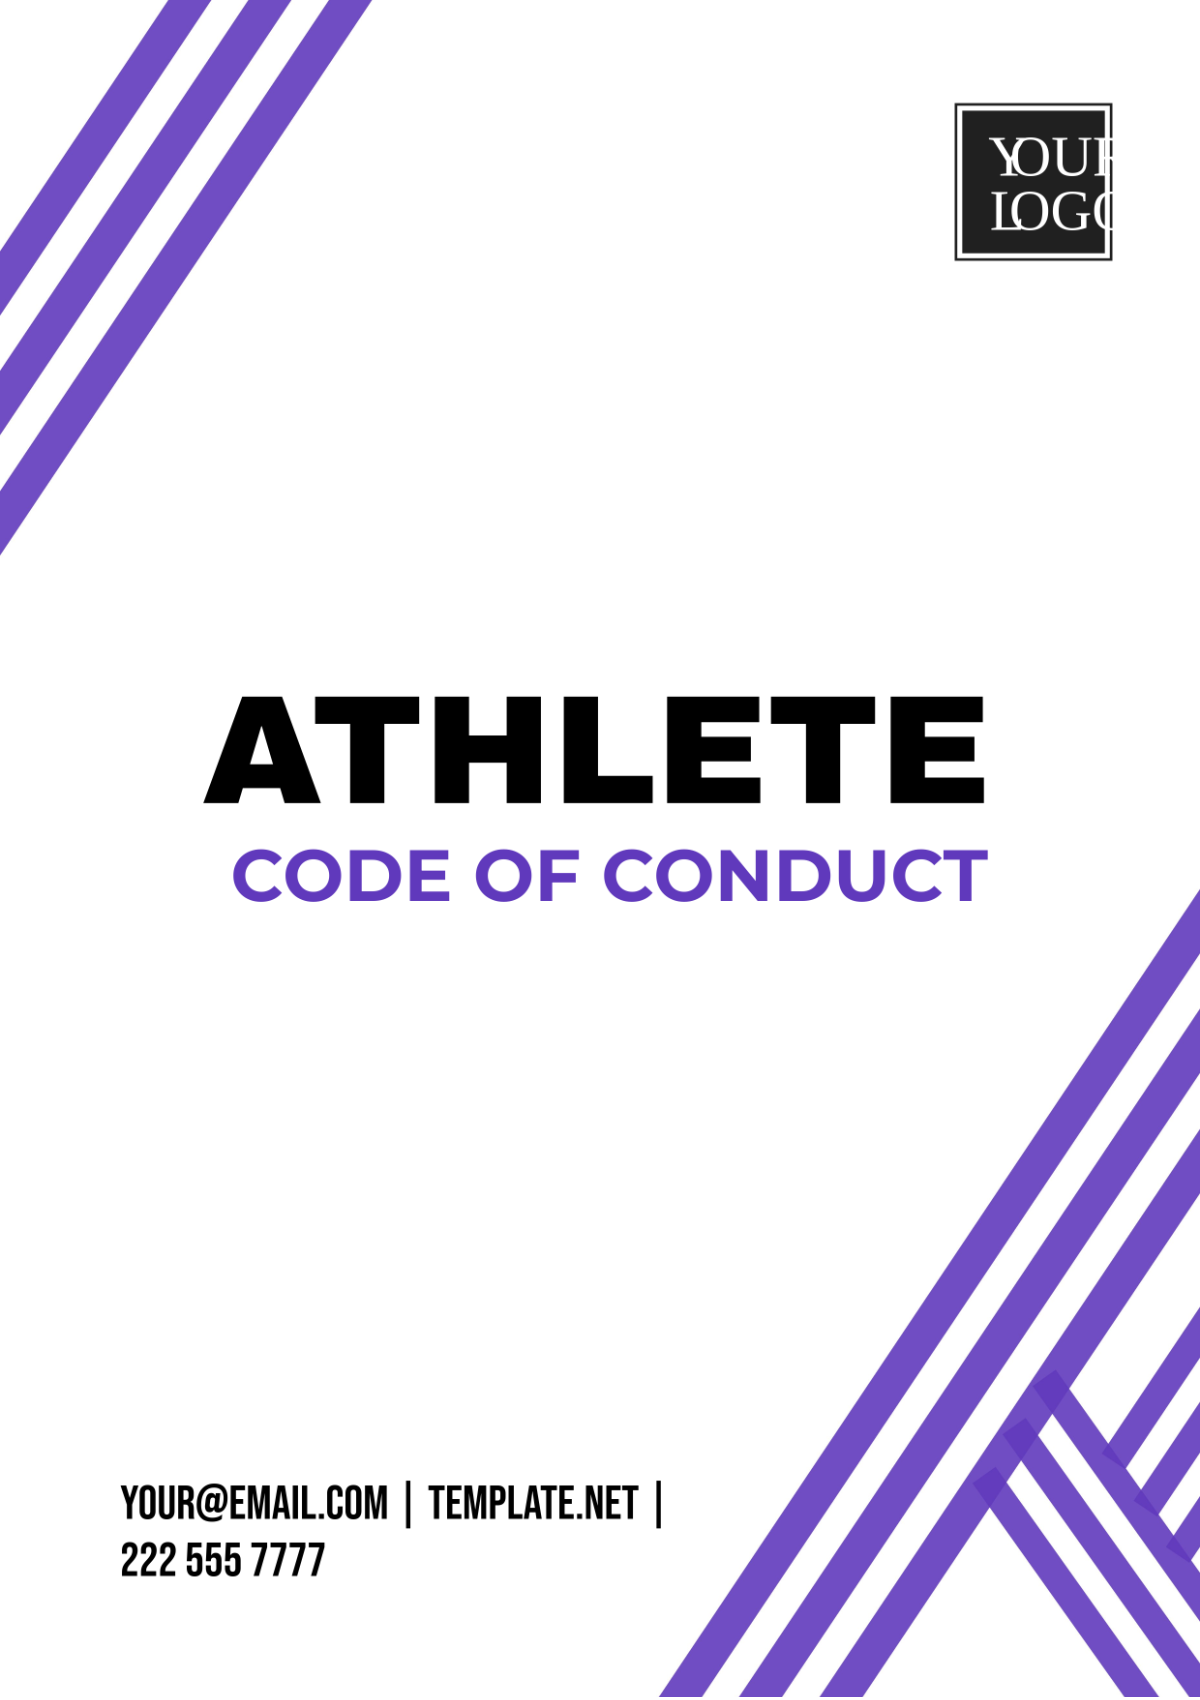 Free Athlete Code of Conduct Template